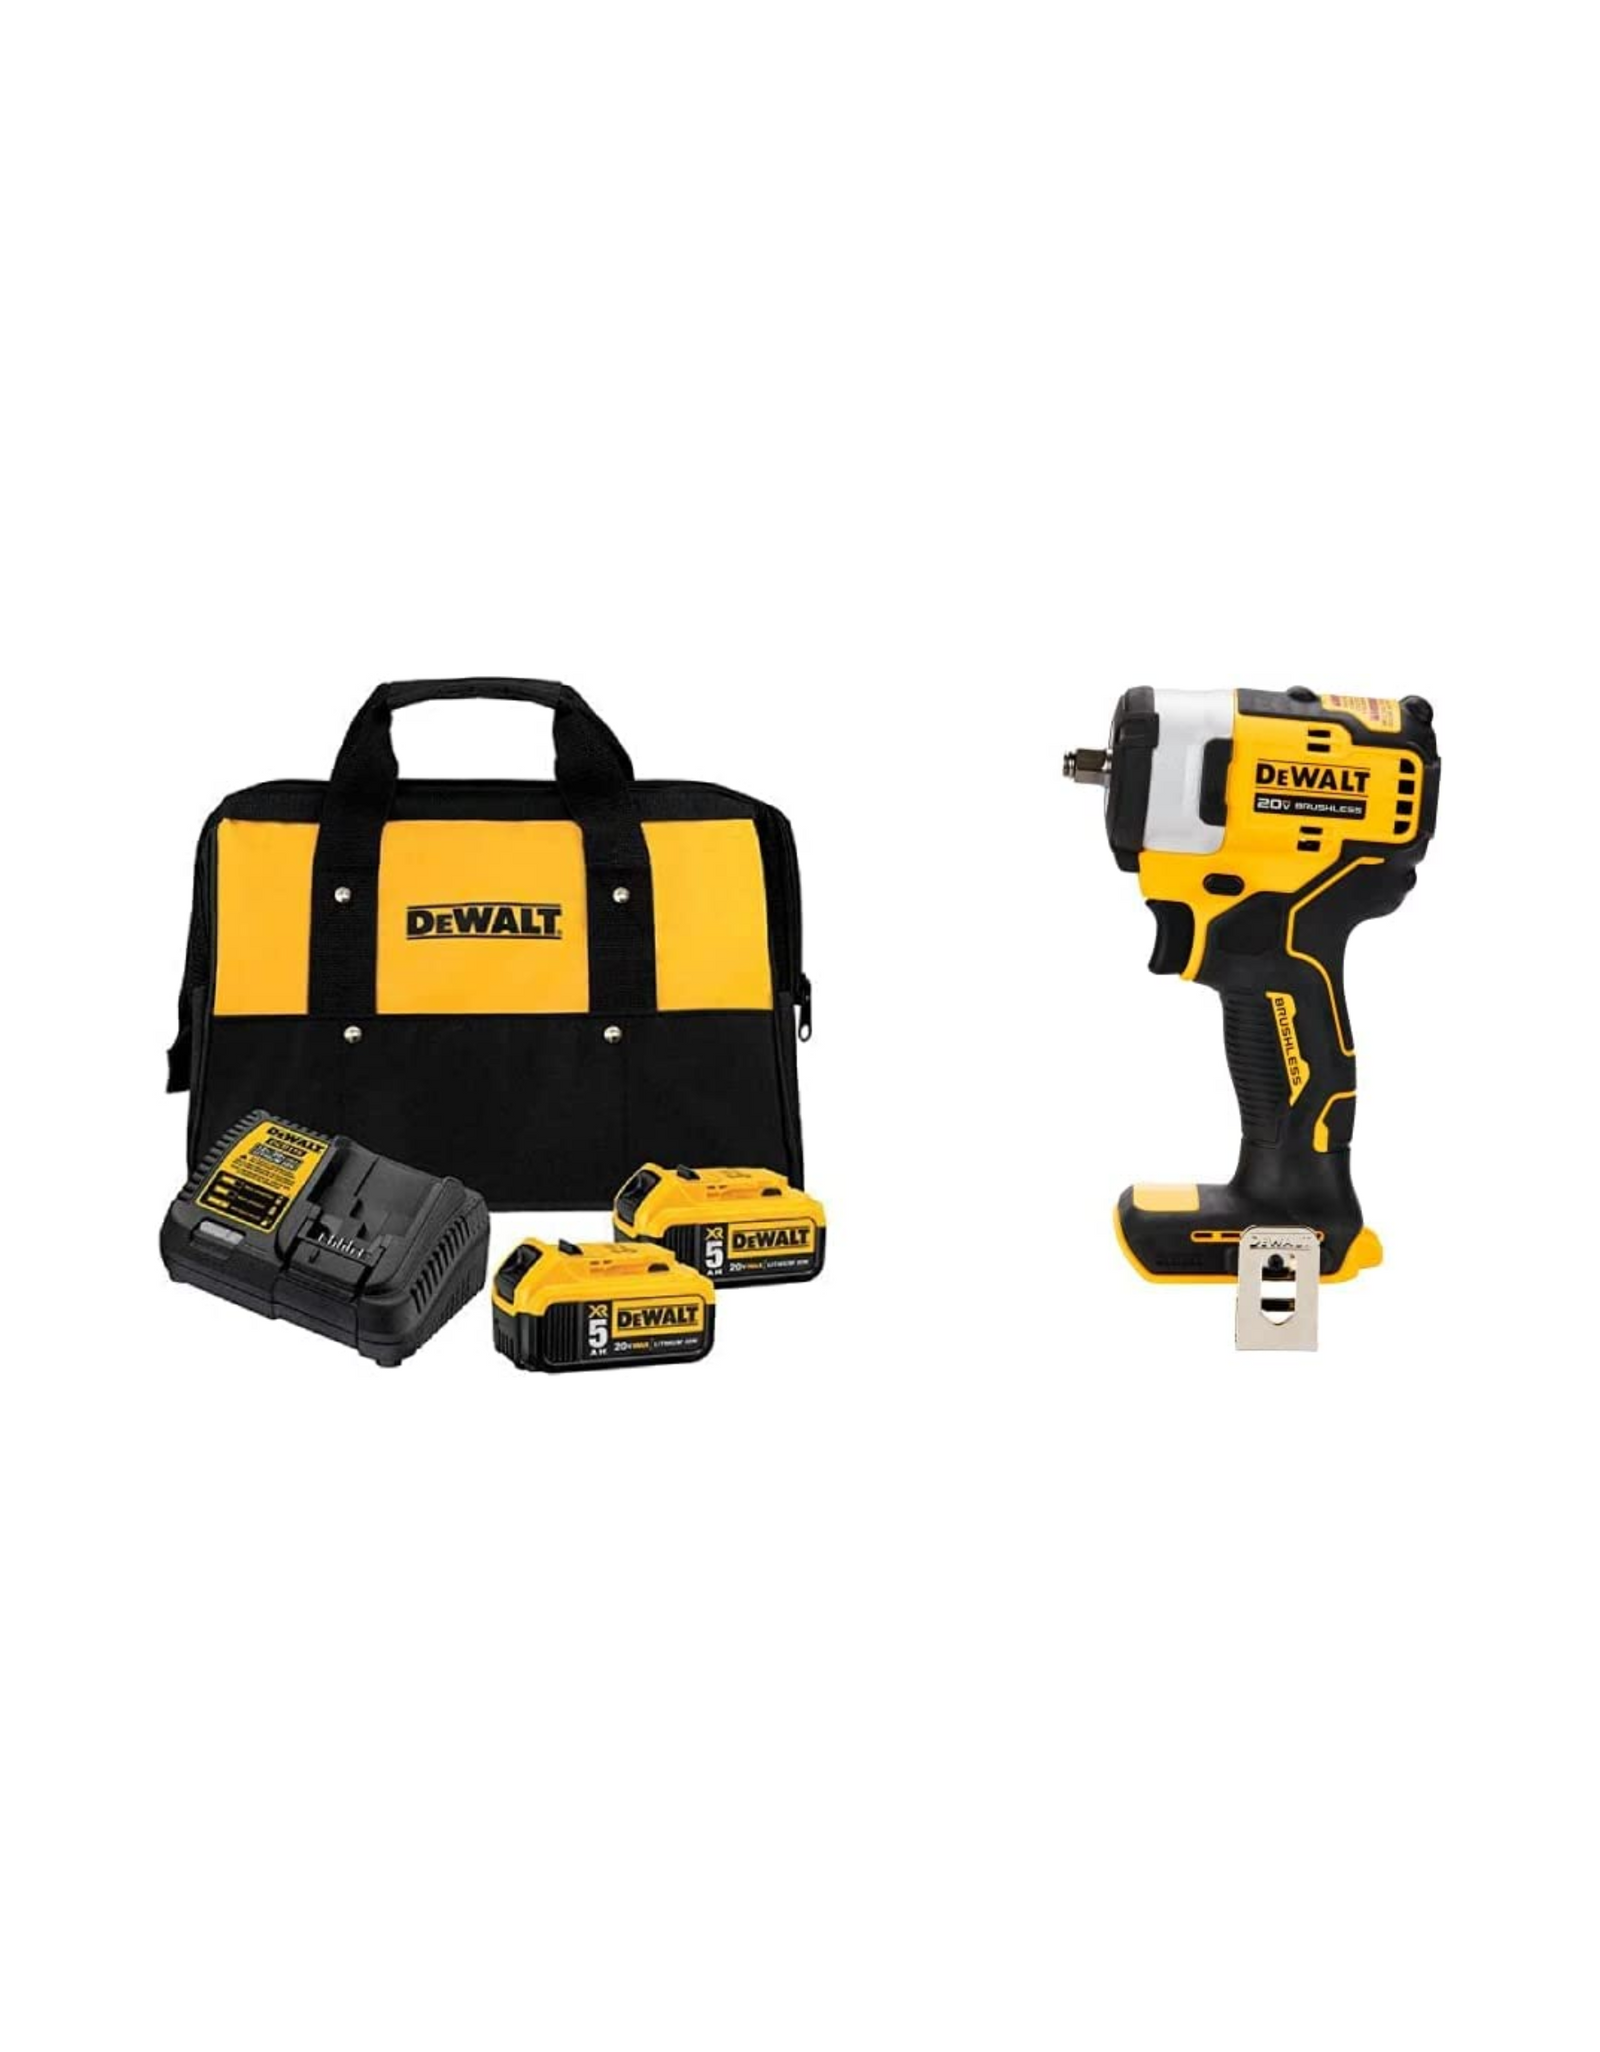 DEWALT DCB205-2CK 20V Max 5.0Ah Starter Kit with 2 Lithium Ion Batteries and DCF913B 20V MAX* 3/8 inch Cordless Impact Wrench with Hog Ring Anvil